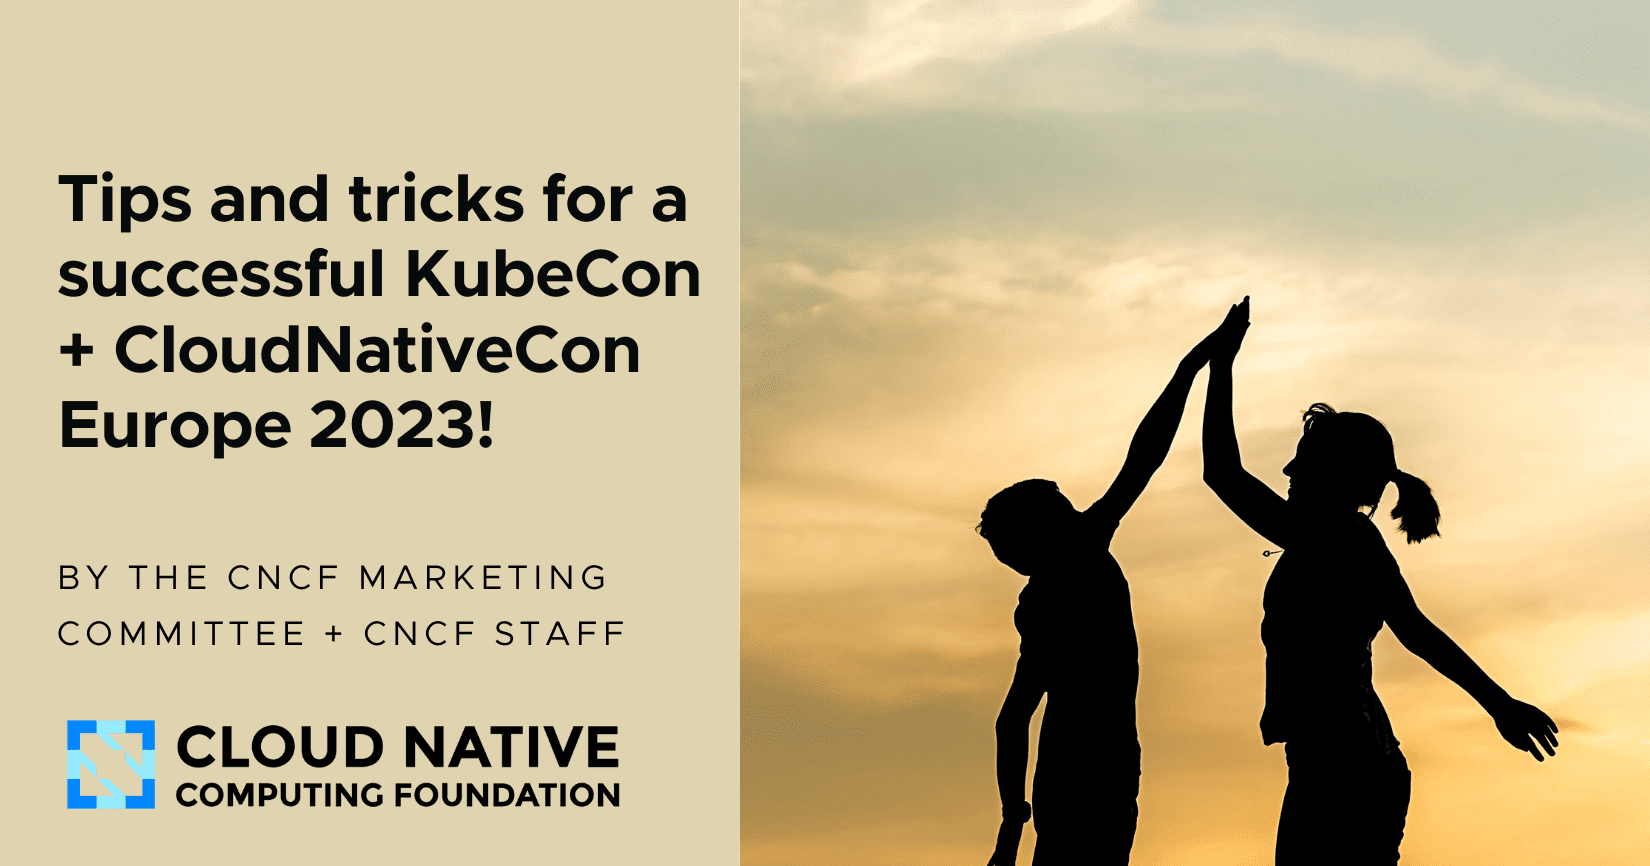 Tips and tricks for a successful KubeCon + CloudNativeCon Europe 2023